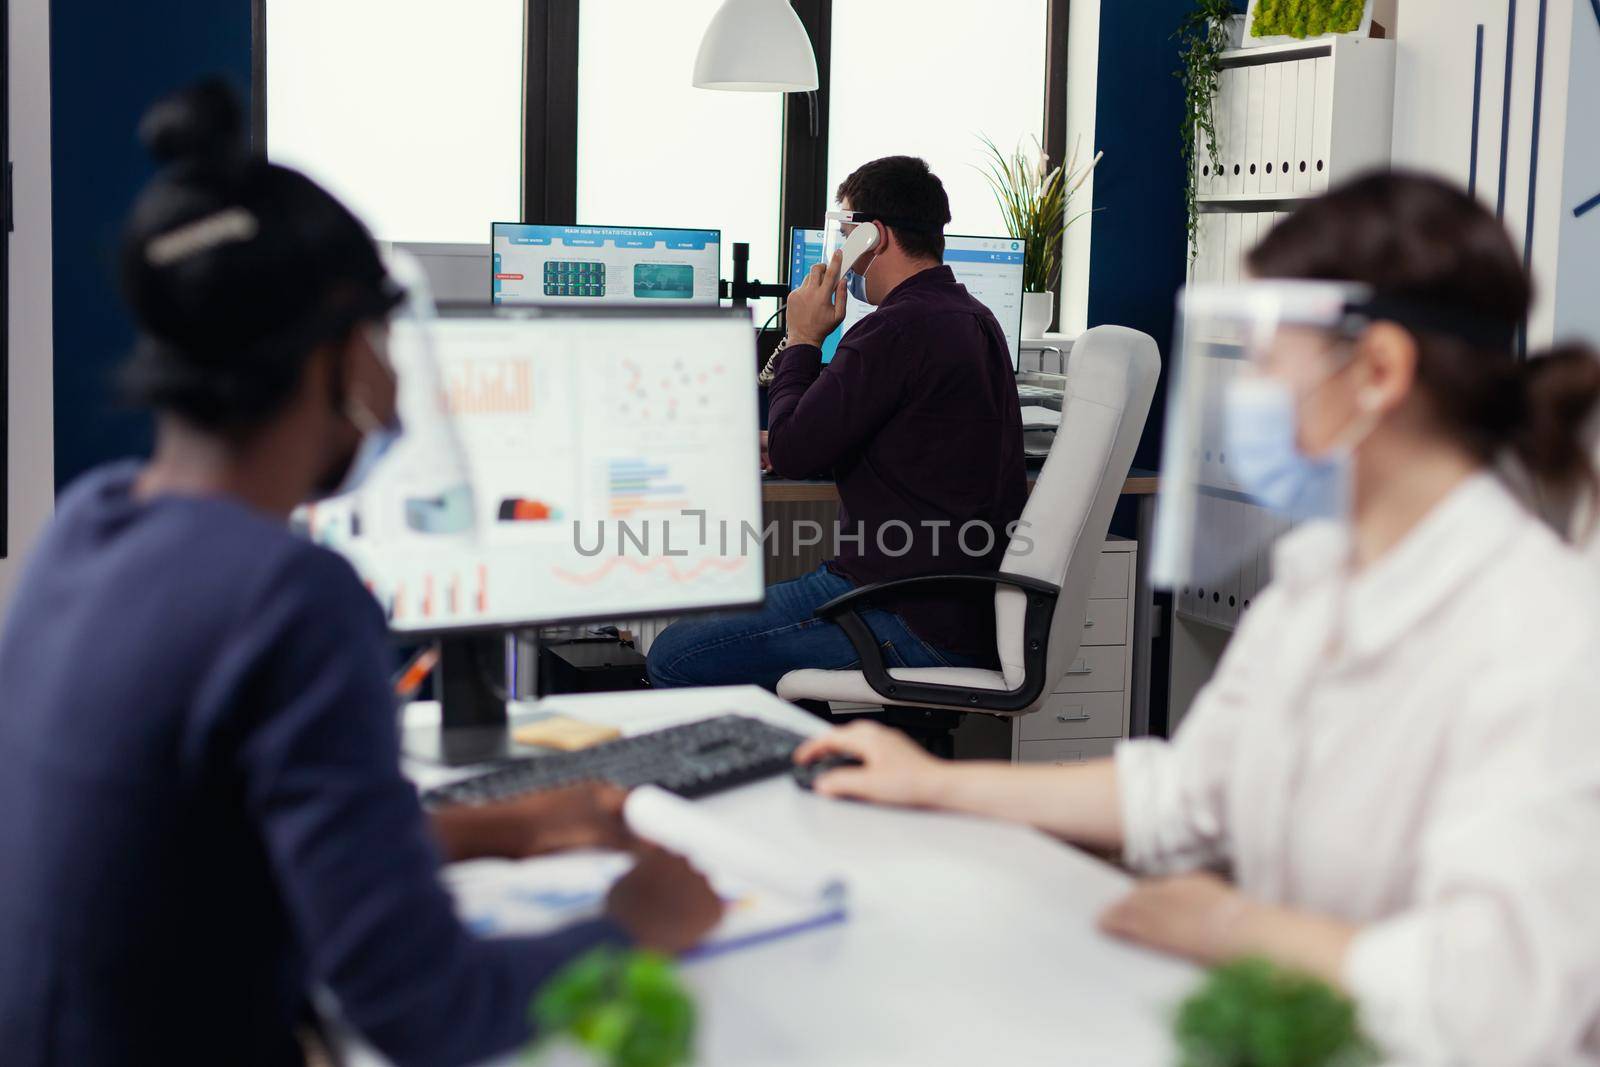 Employee having a phone conversatiion with client sitting at desk wearing face mask for covid19. Multiethnic team working in company with new normal respecting social distance during global pandemic with coronavirus.